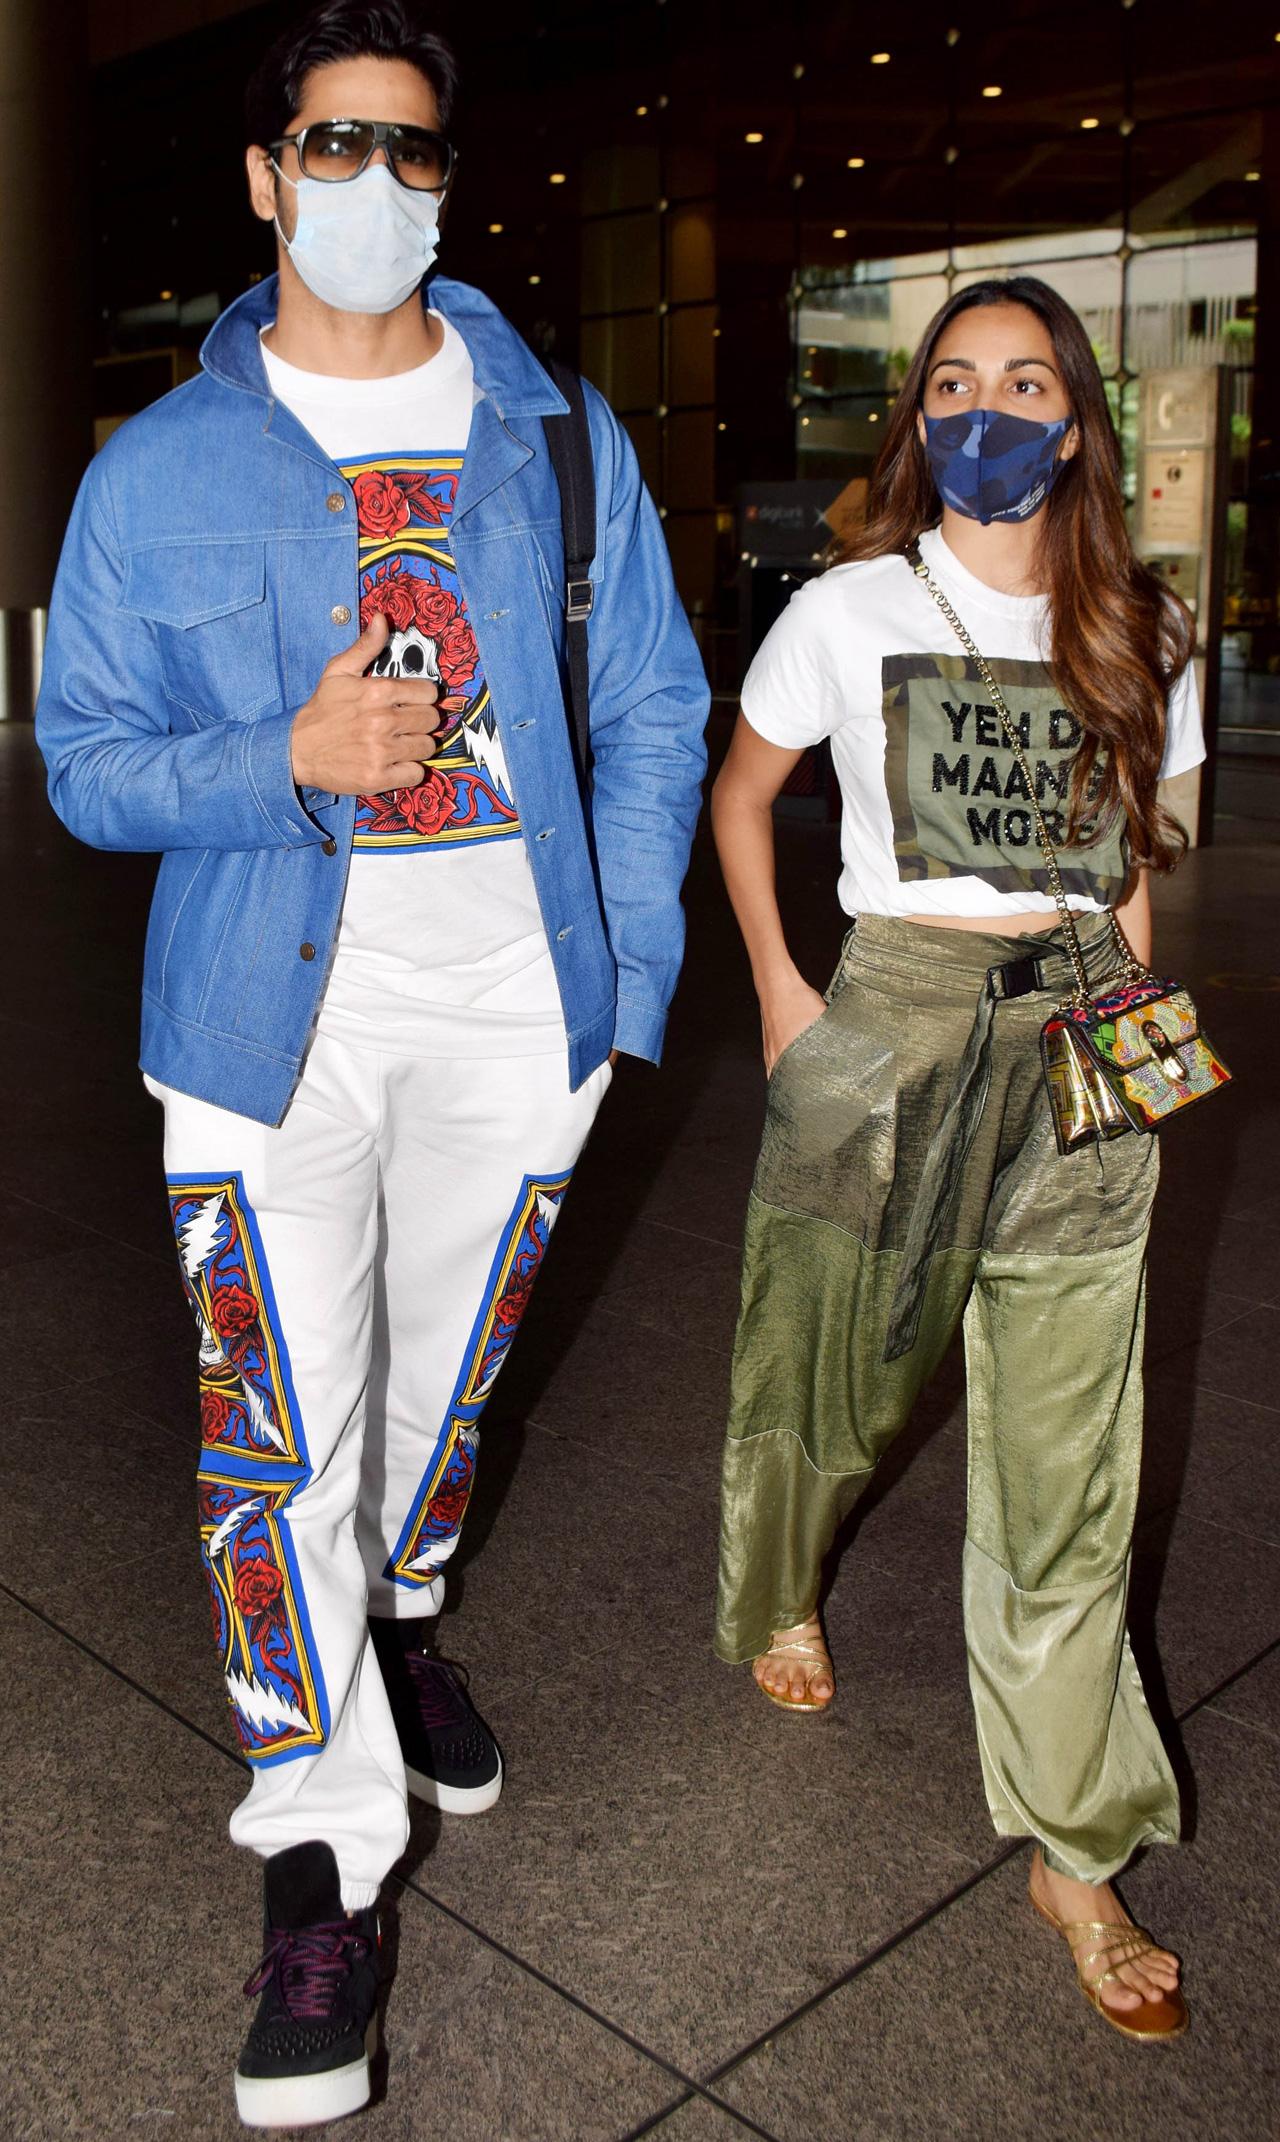 Sidharth Malhotra and Kiara Advani return from New Delhi where they were promoting their film Shershaah at Mumbai airport. The film is set to release on August 12 on Amazon Prime Video.